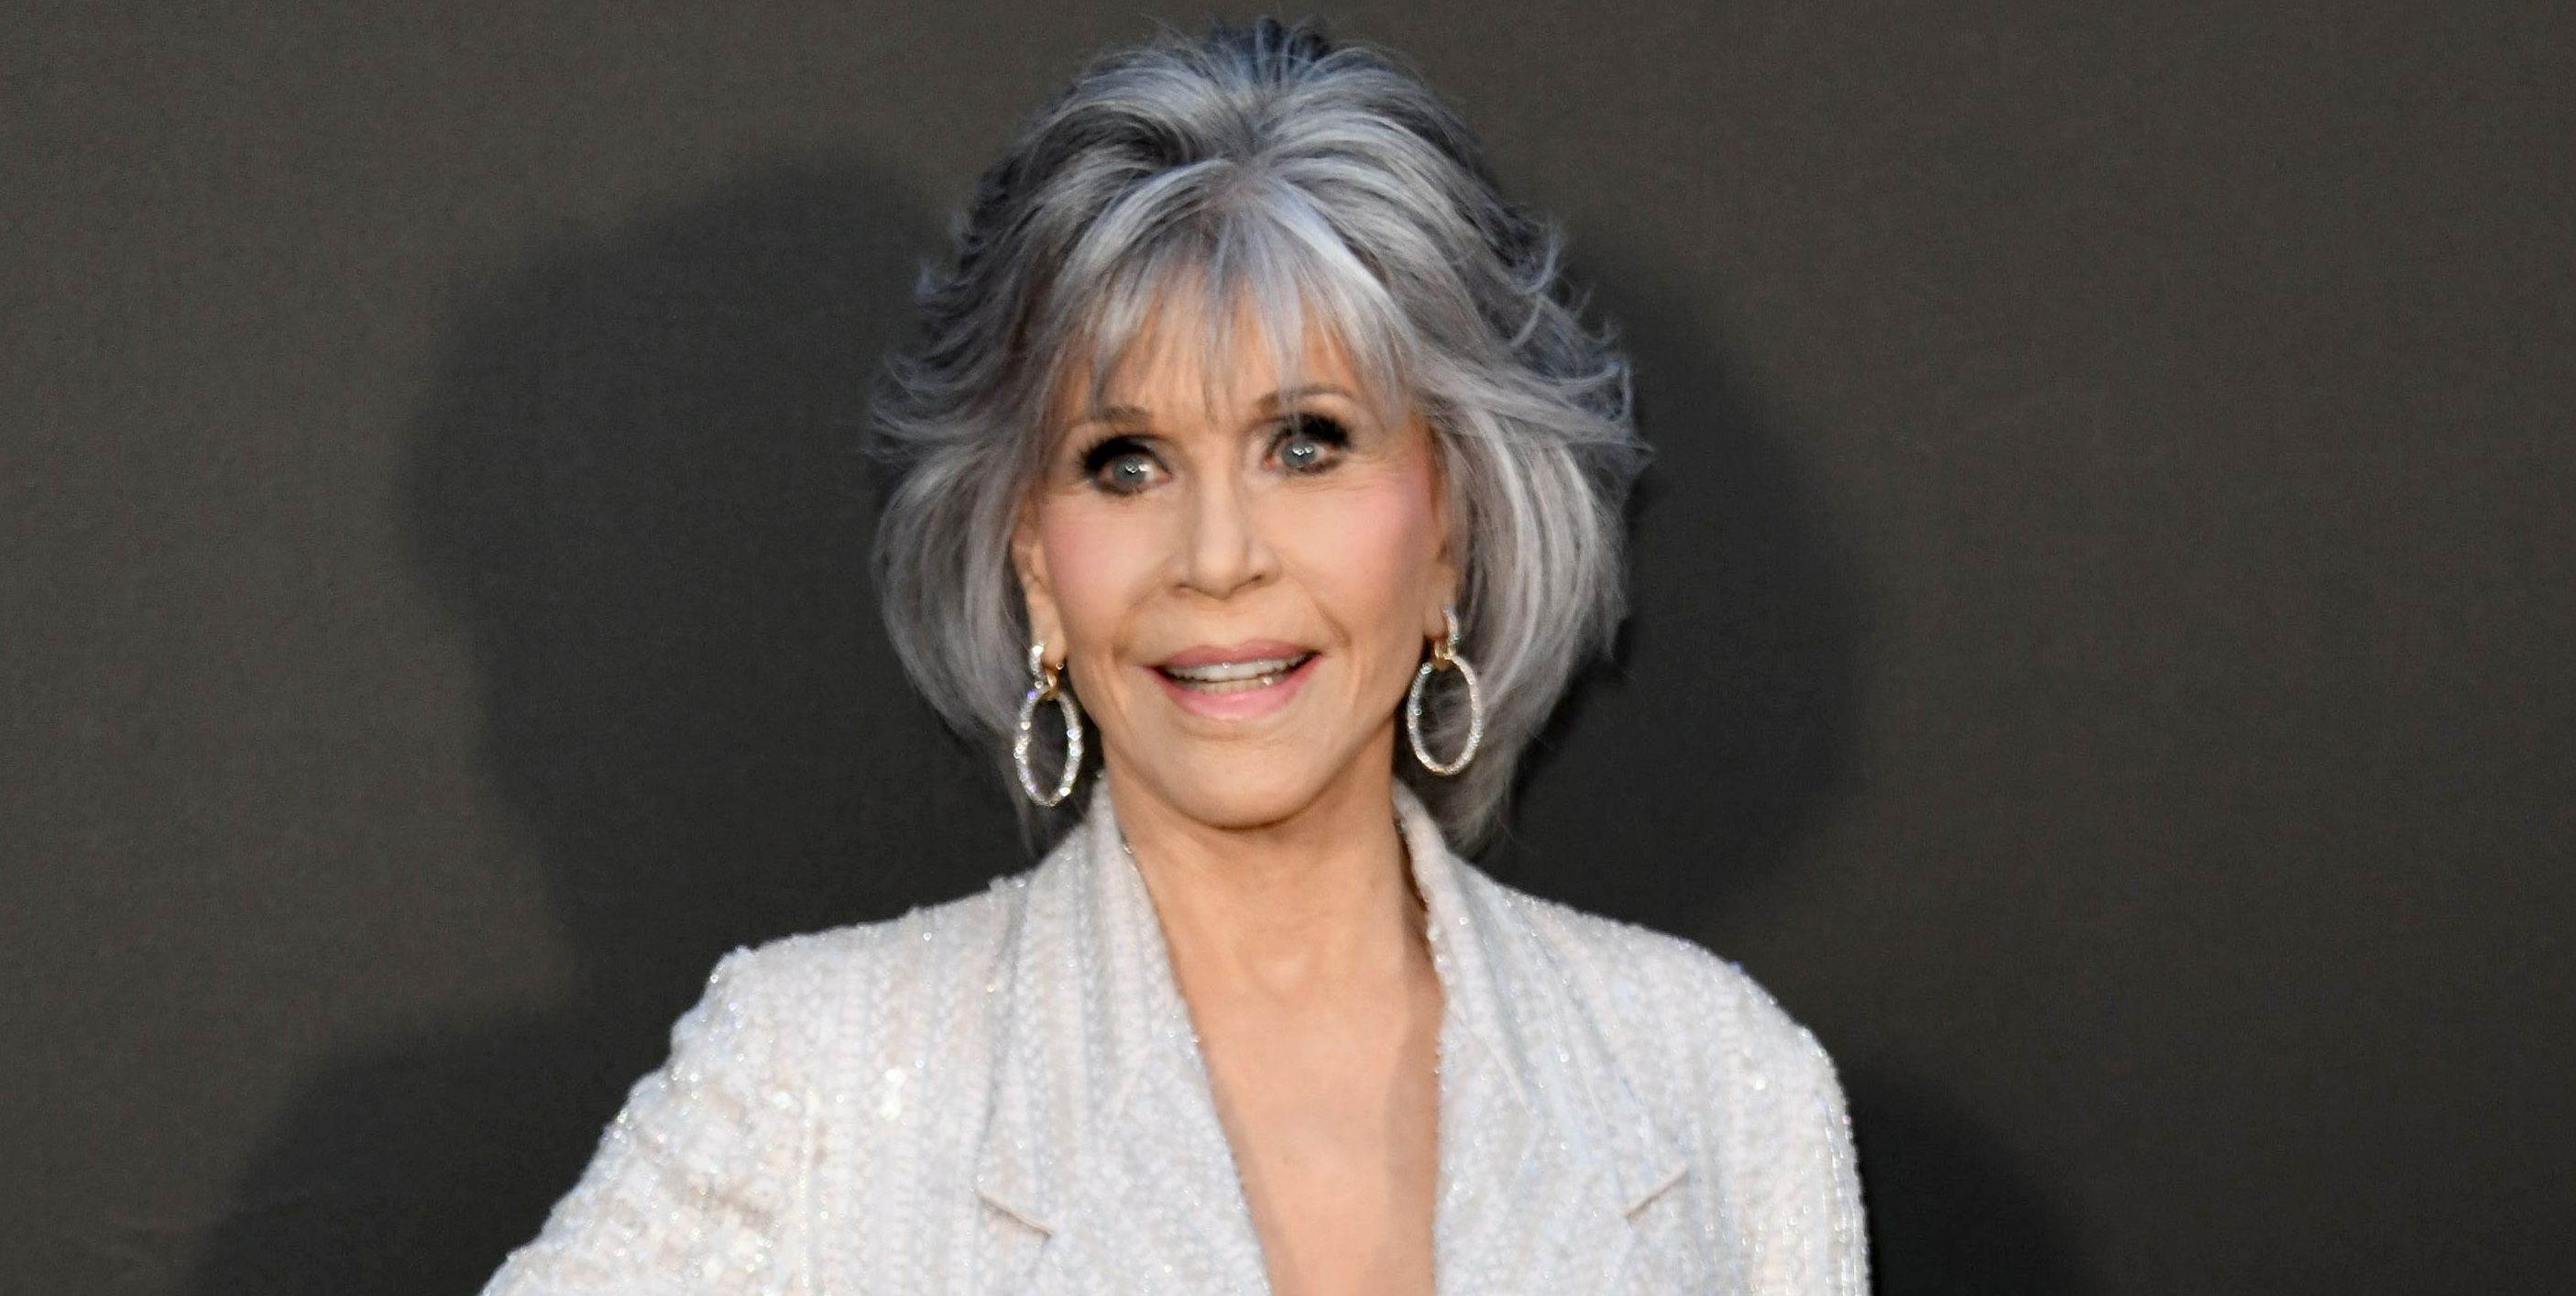 Jane Fonda Is Done With Plastic Surgery Due To Fears Of Looking "Distorted"